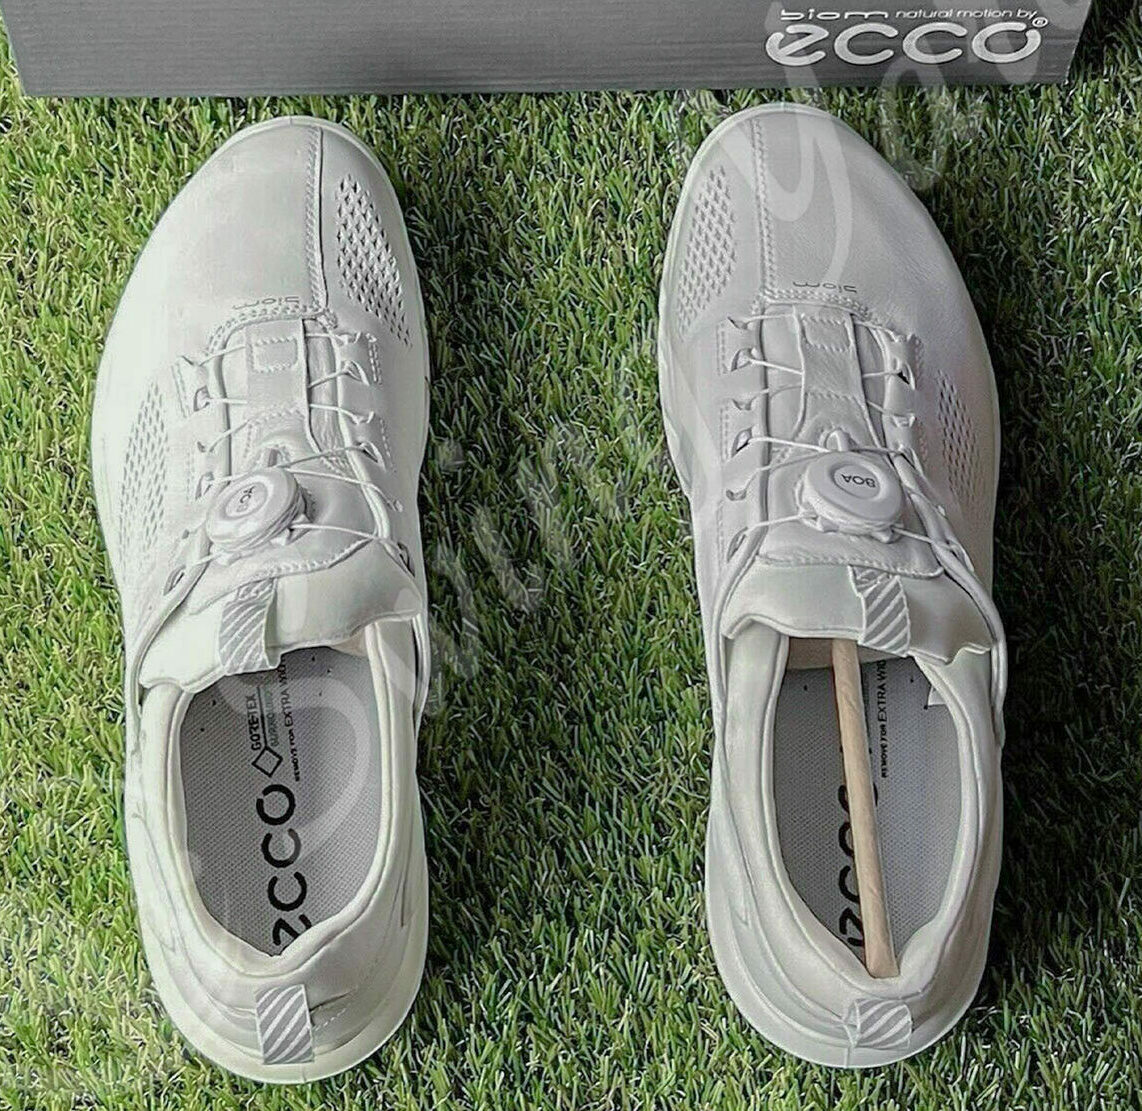 A white pair of ECCO men biom hybrid 3 boa hydromax water resistant winter golf shoes in the grass